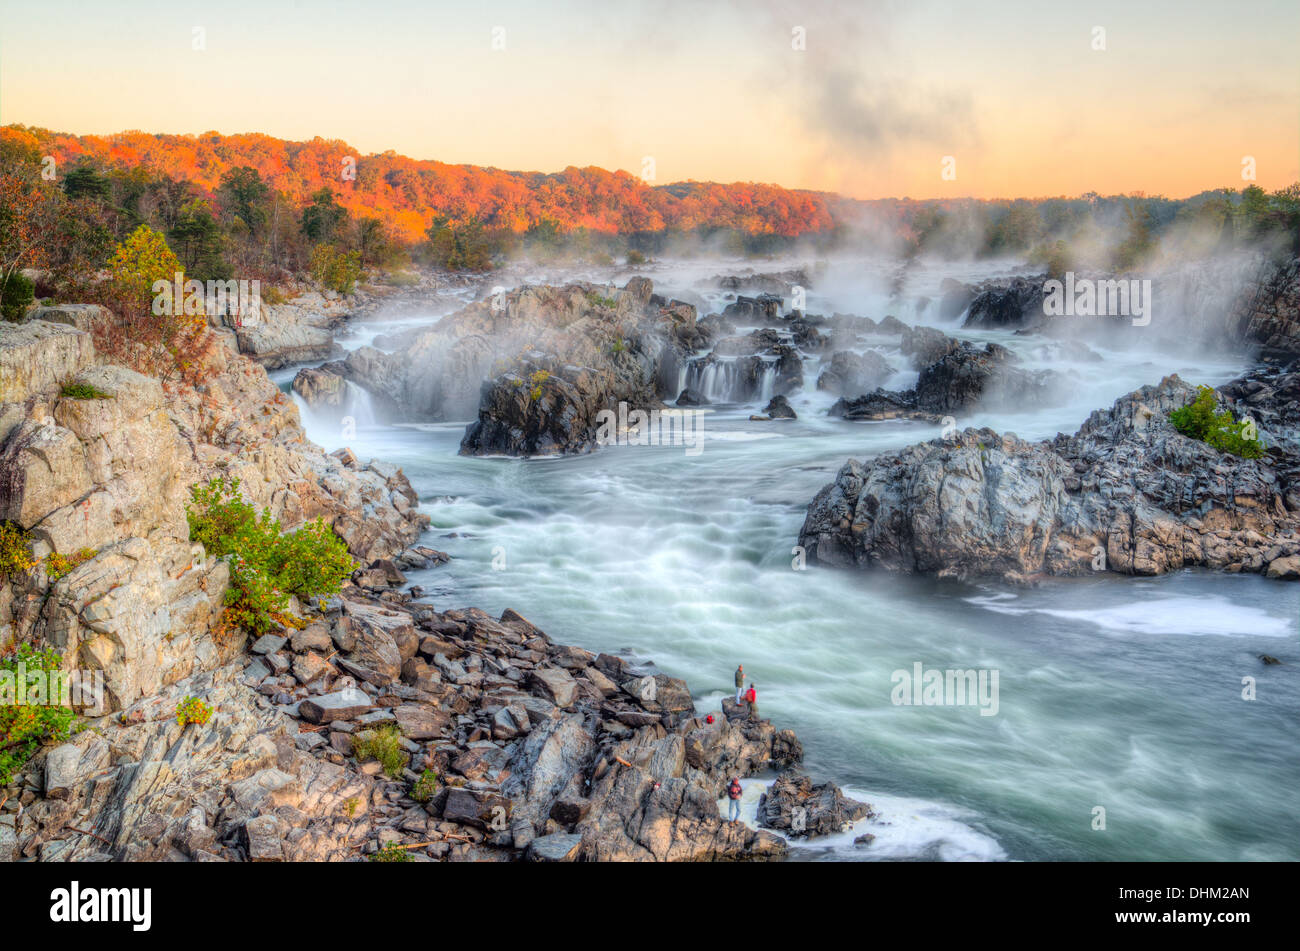 Sunrise at Great Falls State Park at the Peak of the Fall Colors Stock Photo